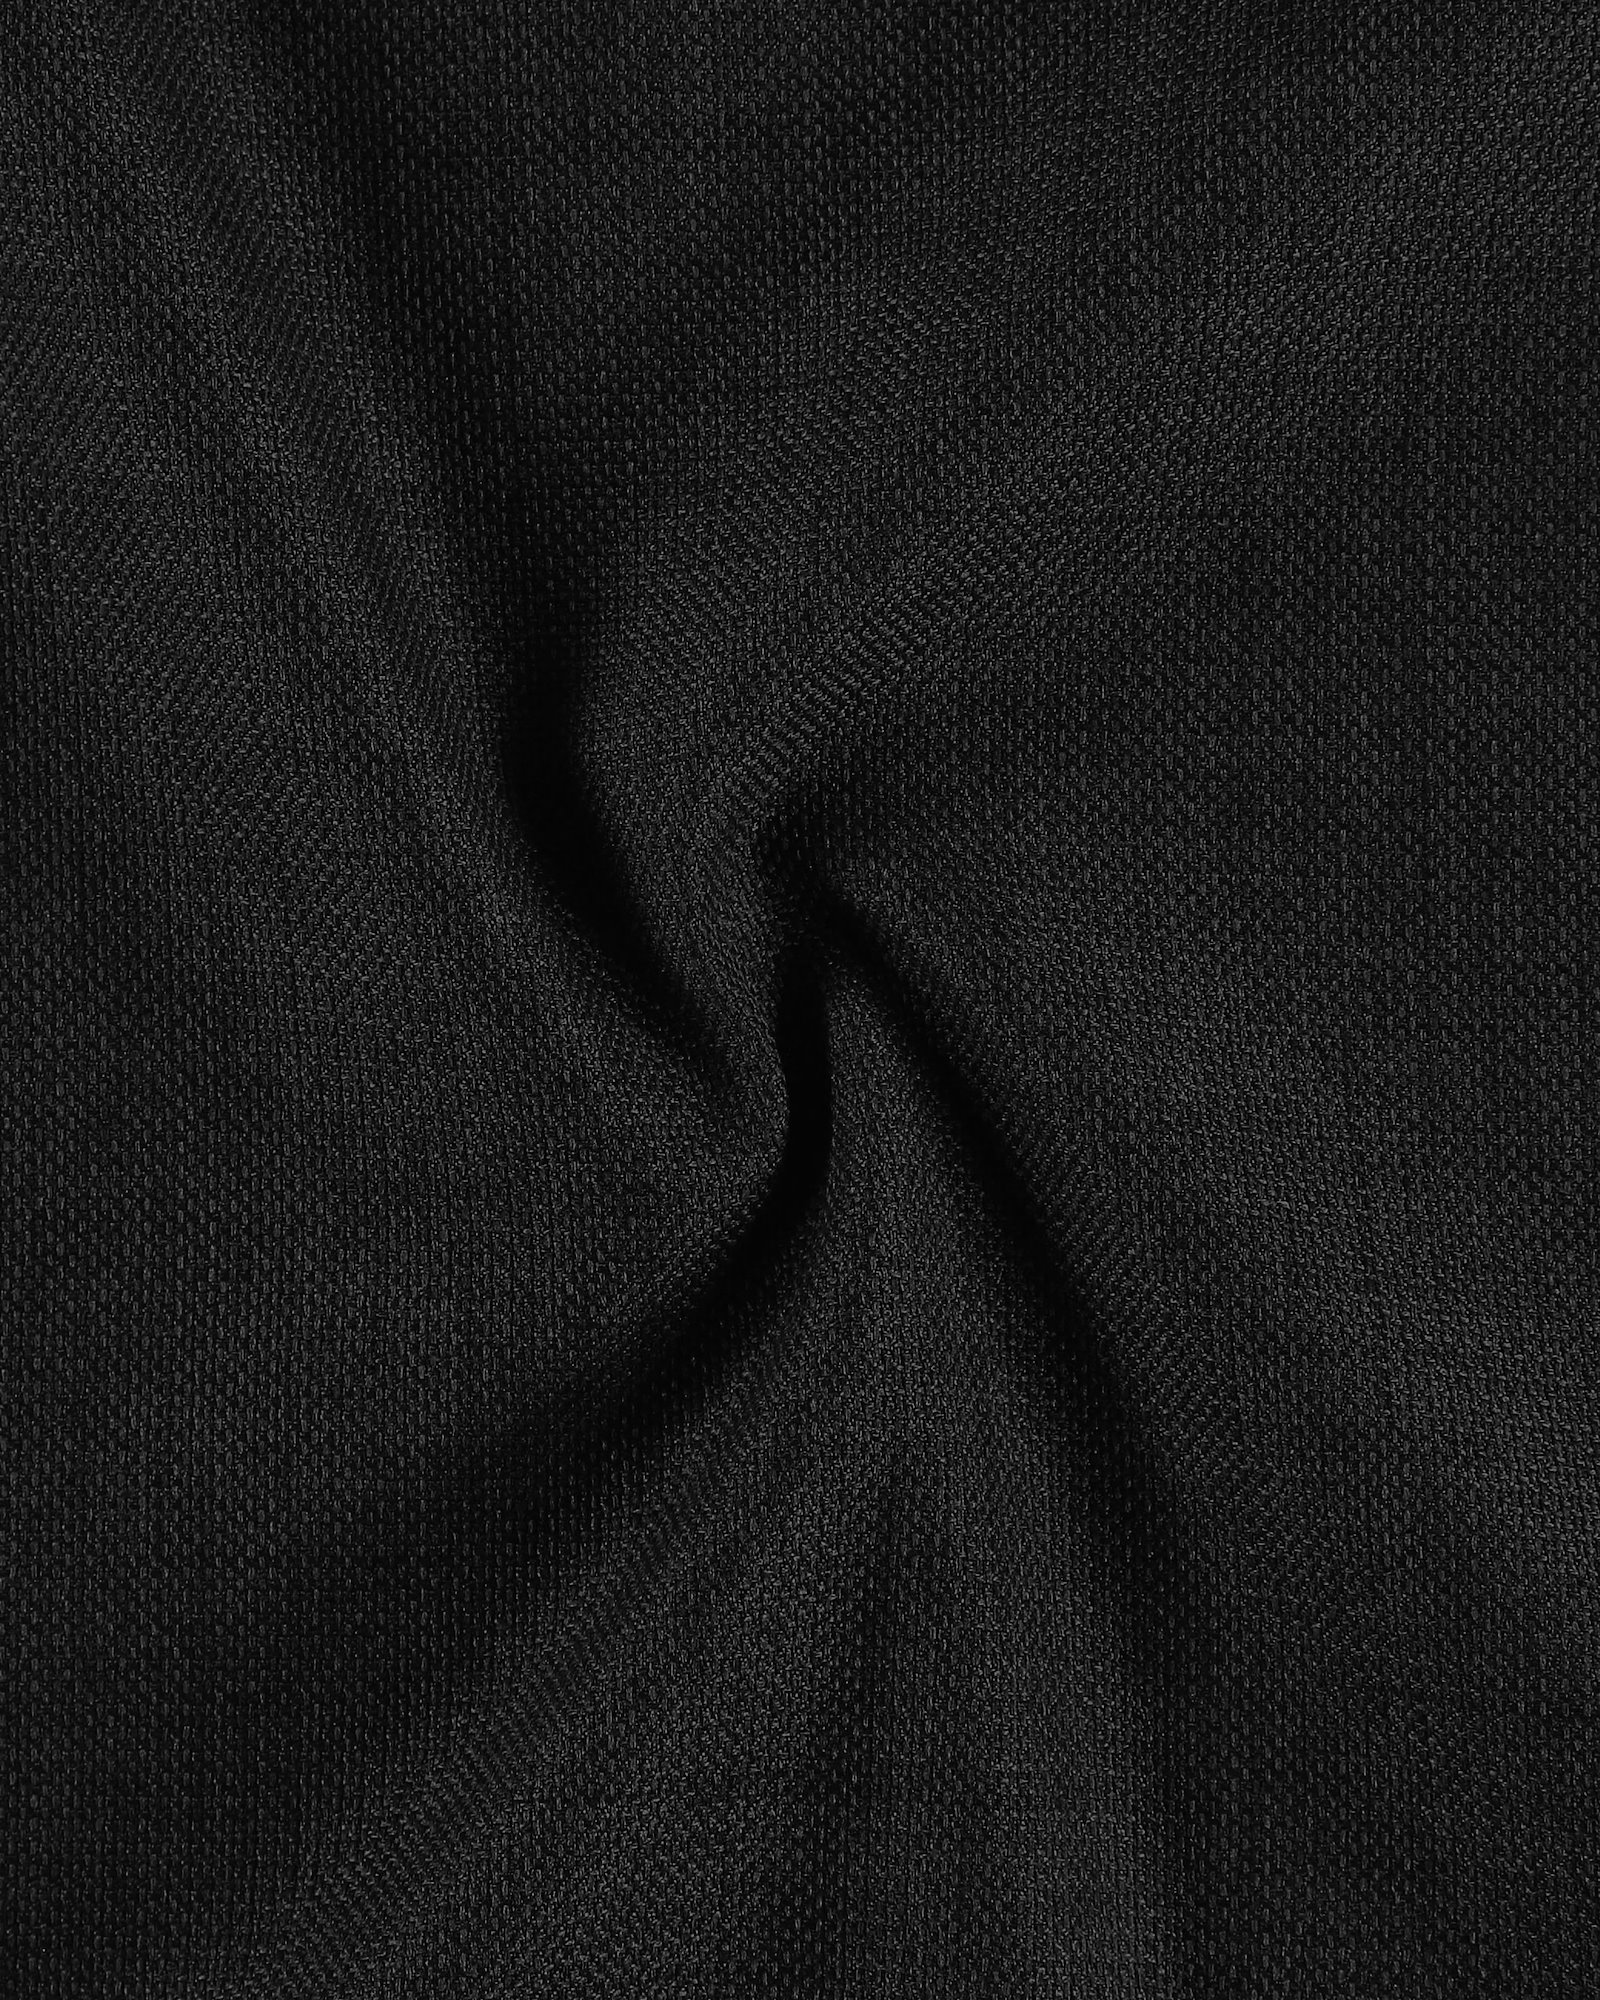 Upholstery fabric black 820978_pack